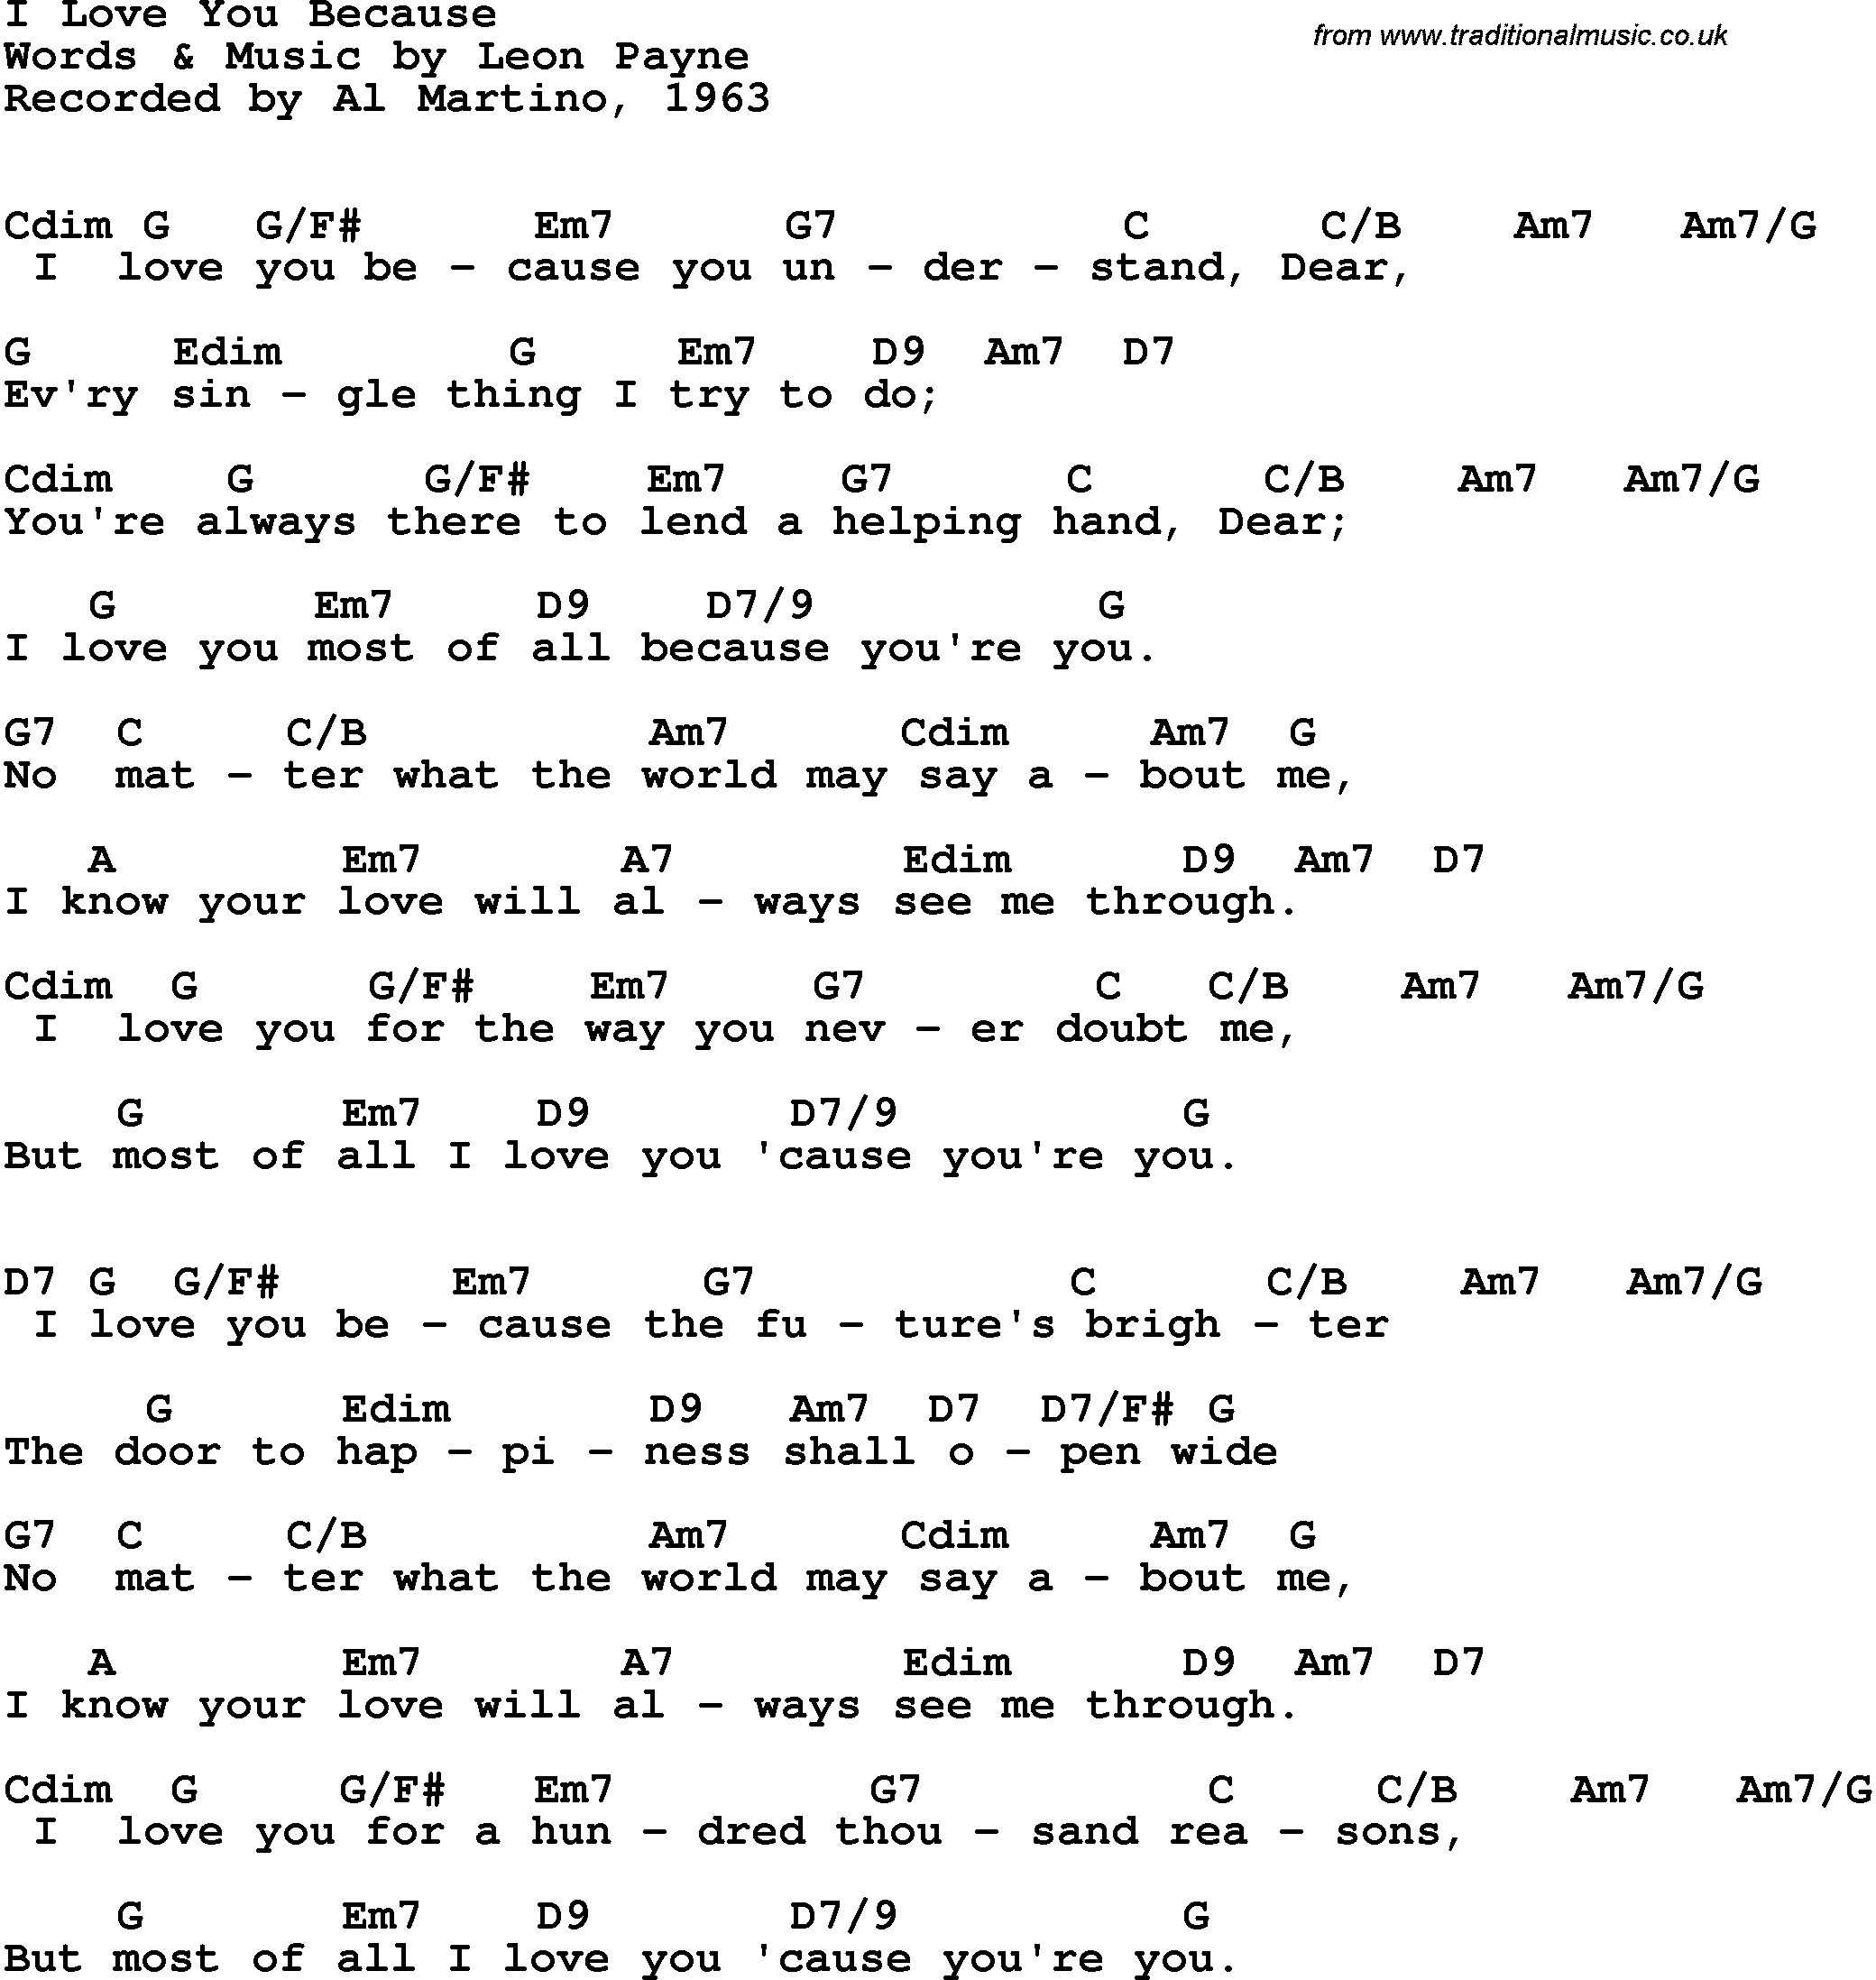 Song Lyrics with guitar chords for I Love You Because - Al Martino, 1963